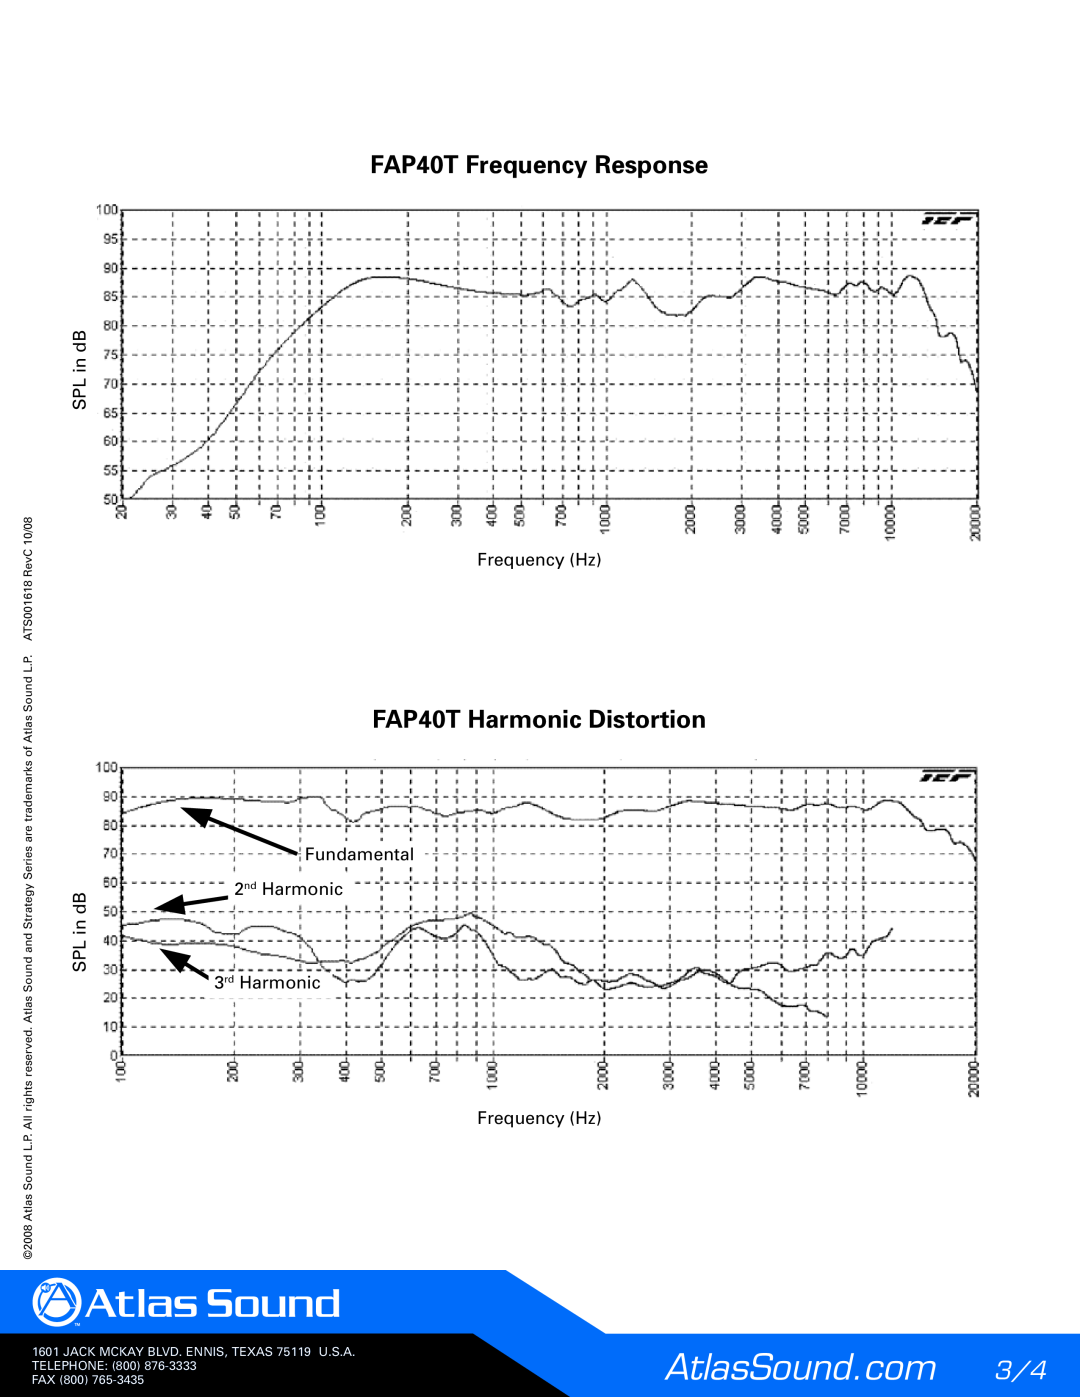 Atlas Sound FAP40T Frequency Response, FAP40T Harmonic Distortion, SPL in dB, Frequency Hz, ATS001618 RevC 10/08, Fax 